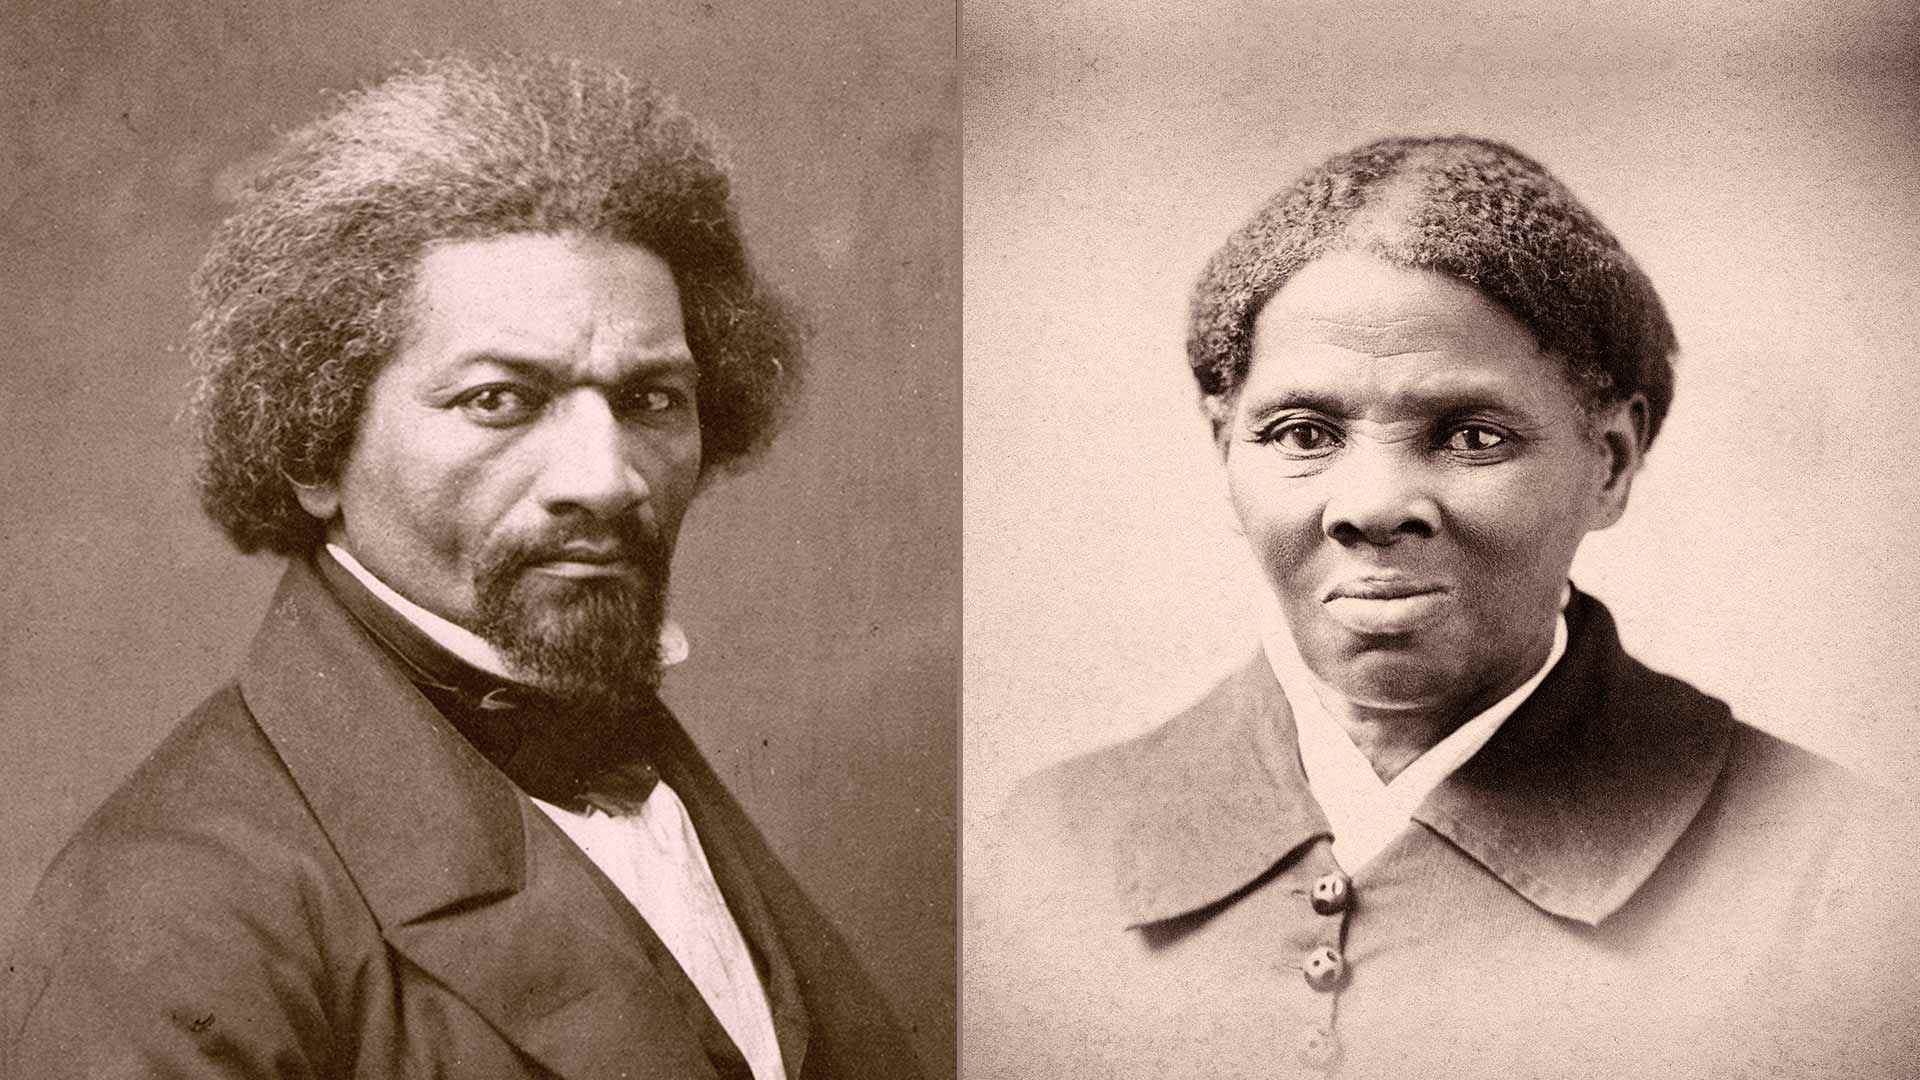 Two new PBS documentaries premiering this month, “Becoming Frederick Douglass” and “Harriet Tubman: Visions of Freedom,” include interviews from three UMD experts. Douglass image courtesy of New York Historical Society/Bridgeman Images; Tubman image courtesy of Alamy.